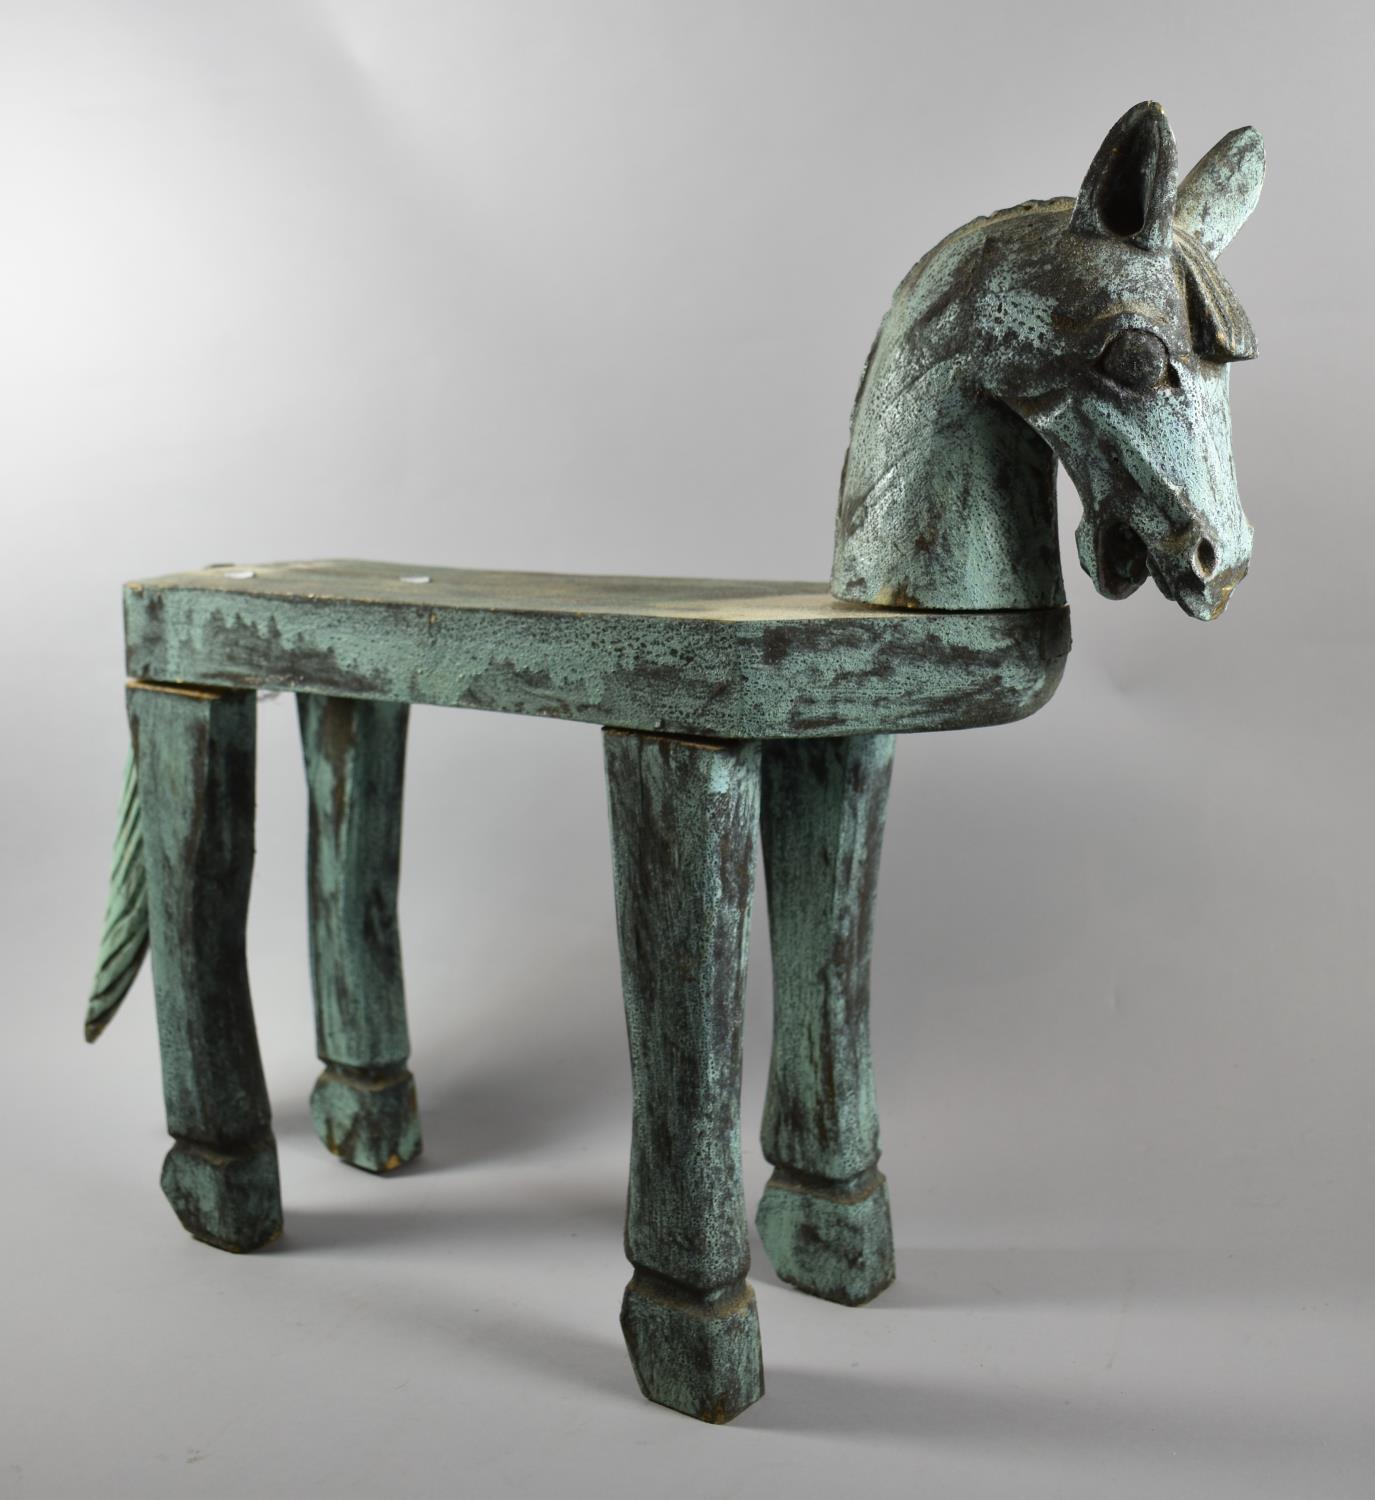 A Carved Wooden Stool or Plant Stand in the Form of a Horse, 53cm High